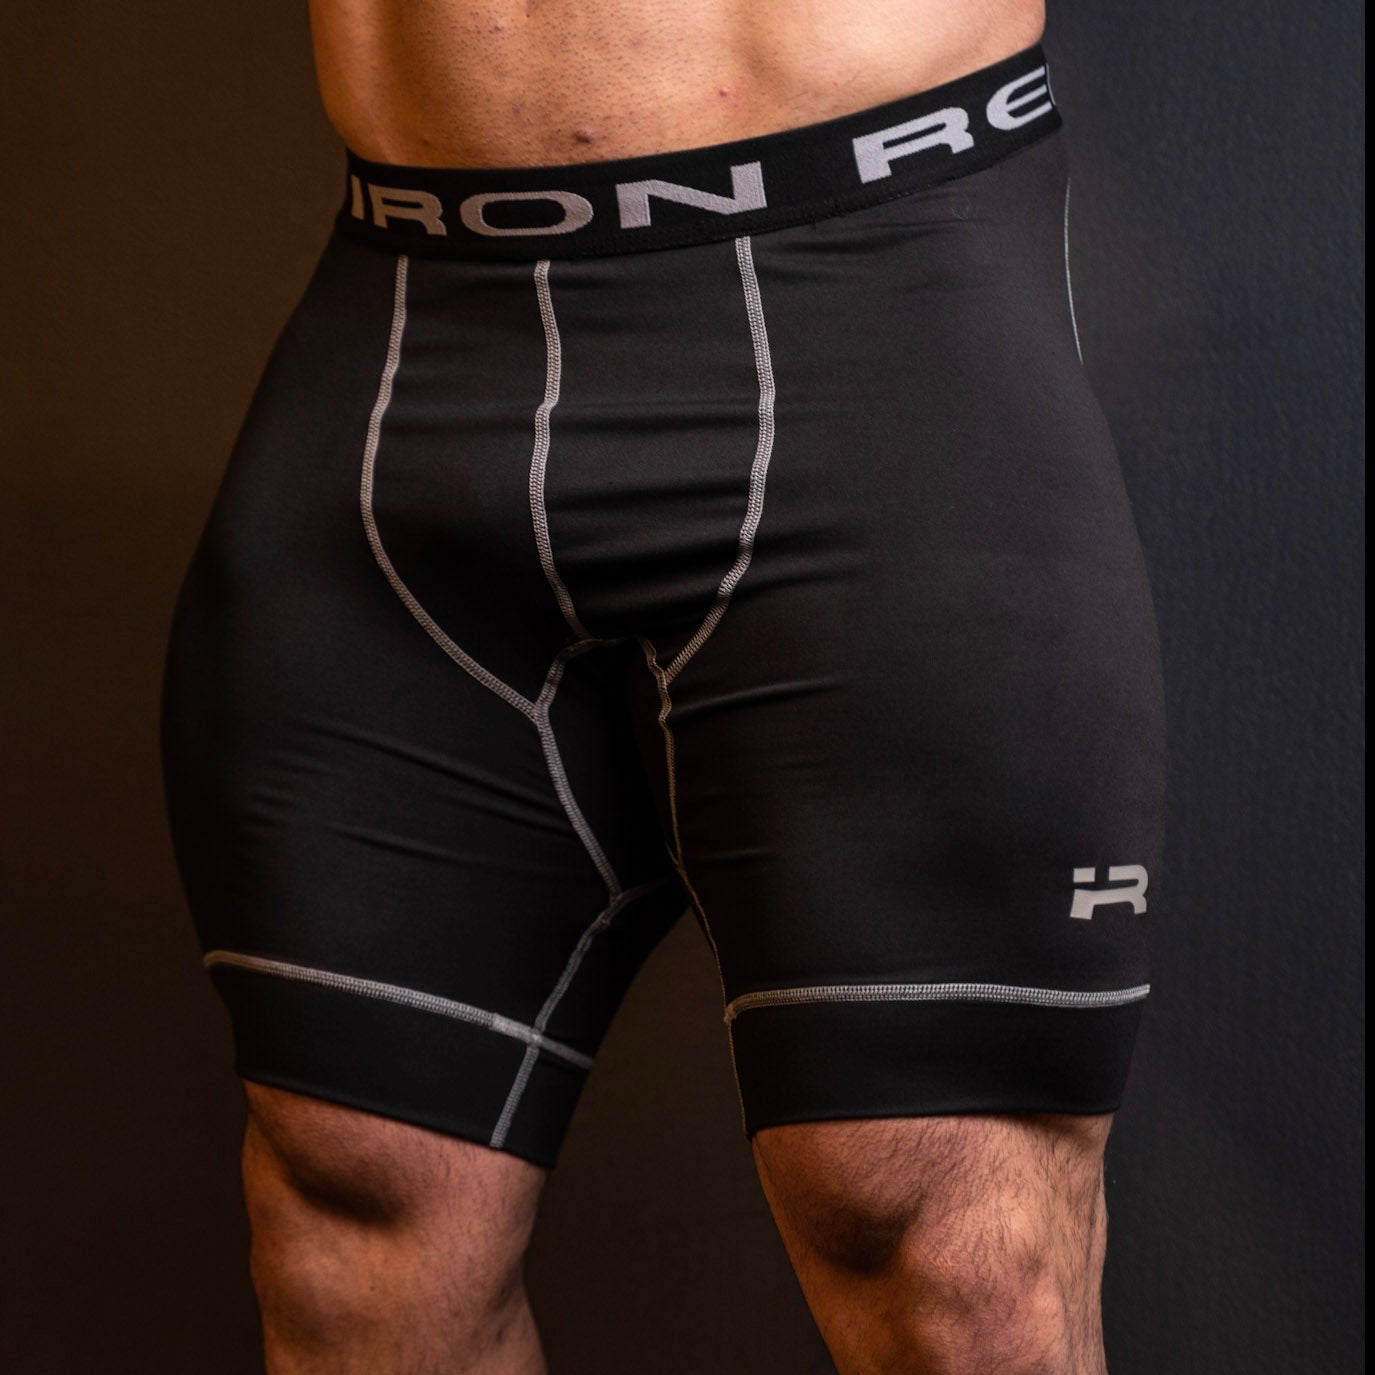 Mid Rise Compression Short in Rebel Heartbeat – Rebel Athletic